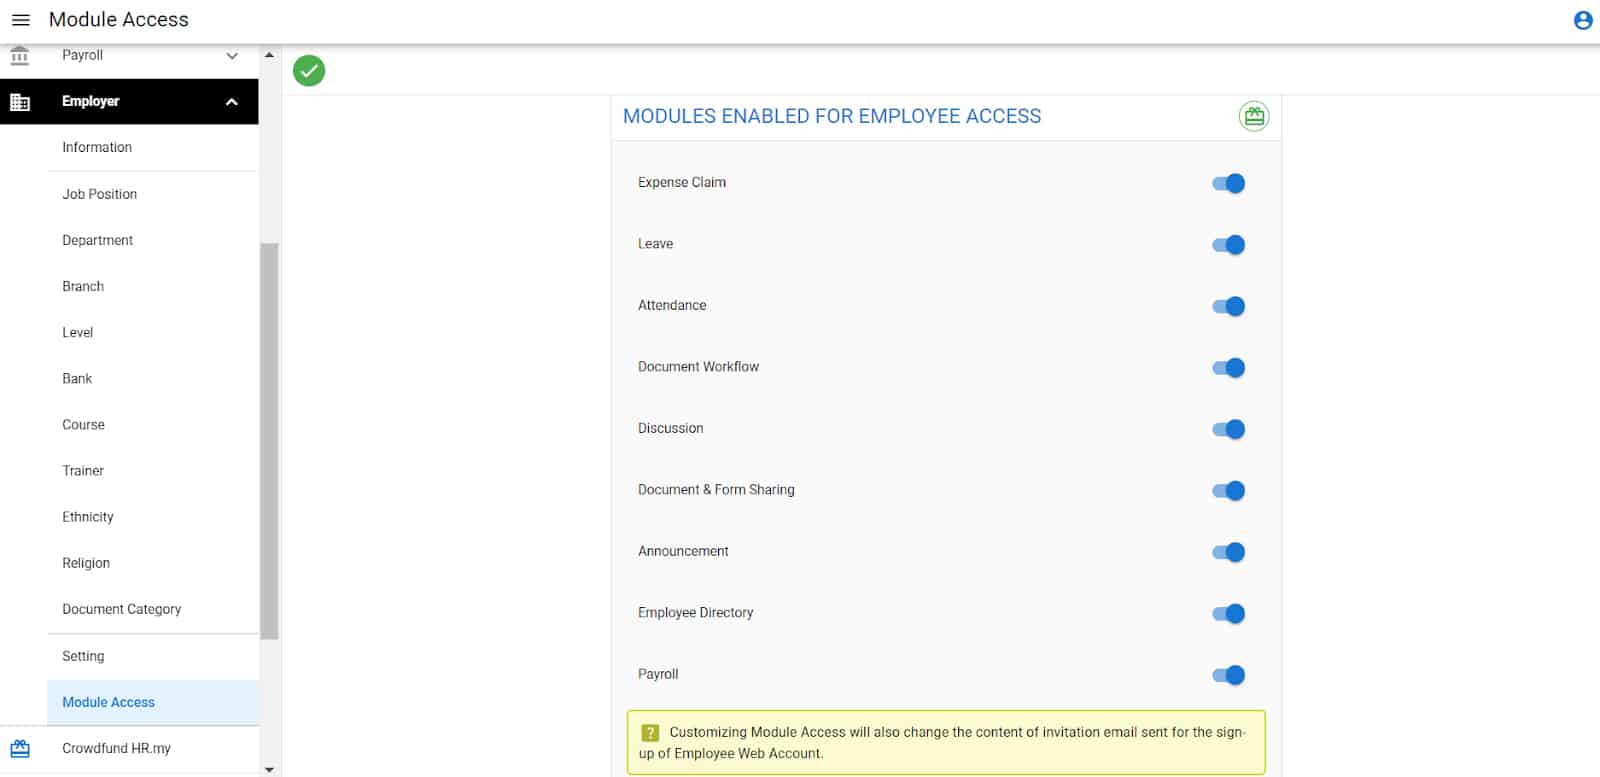 Enable module access for employees in HR.my account dashboard.